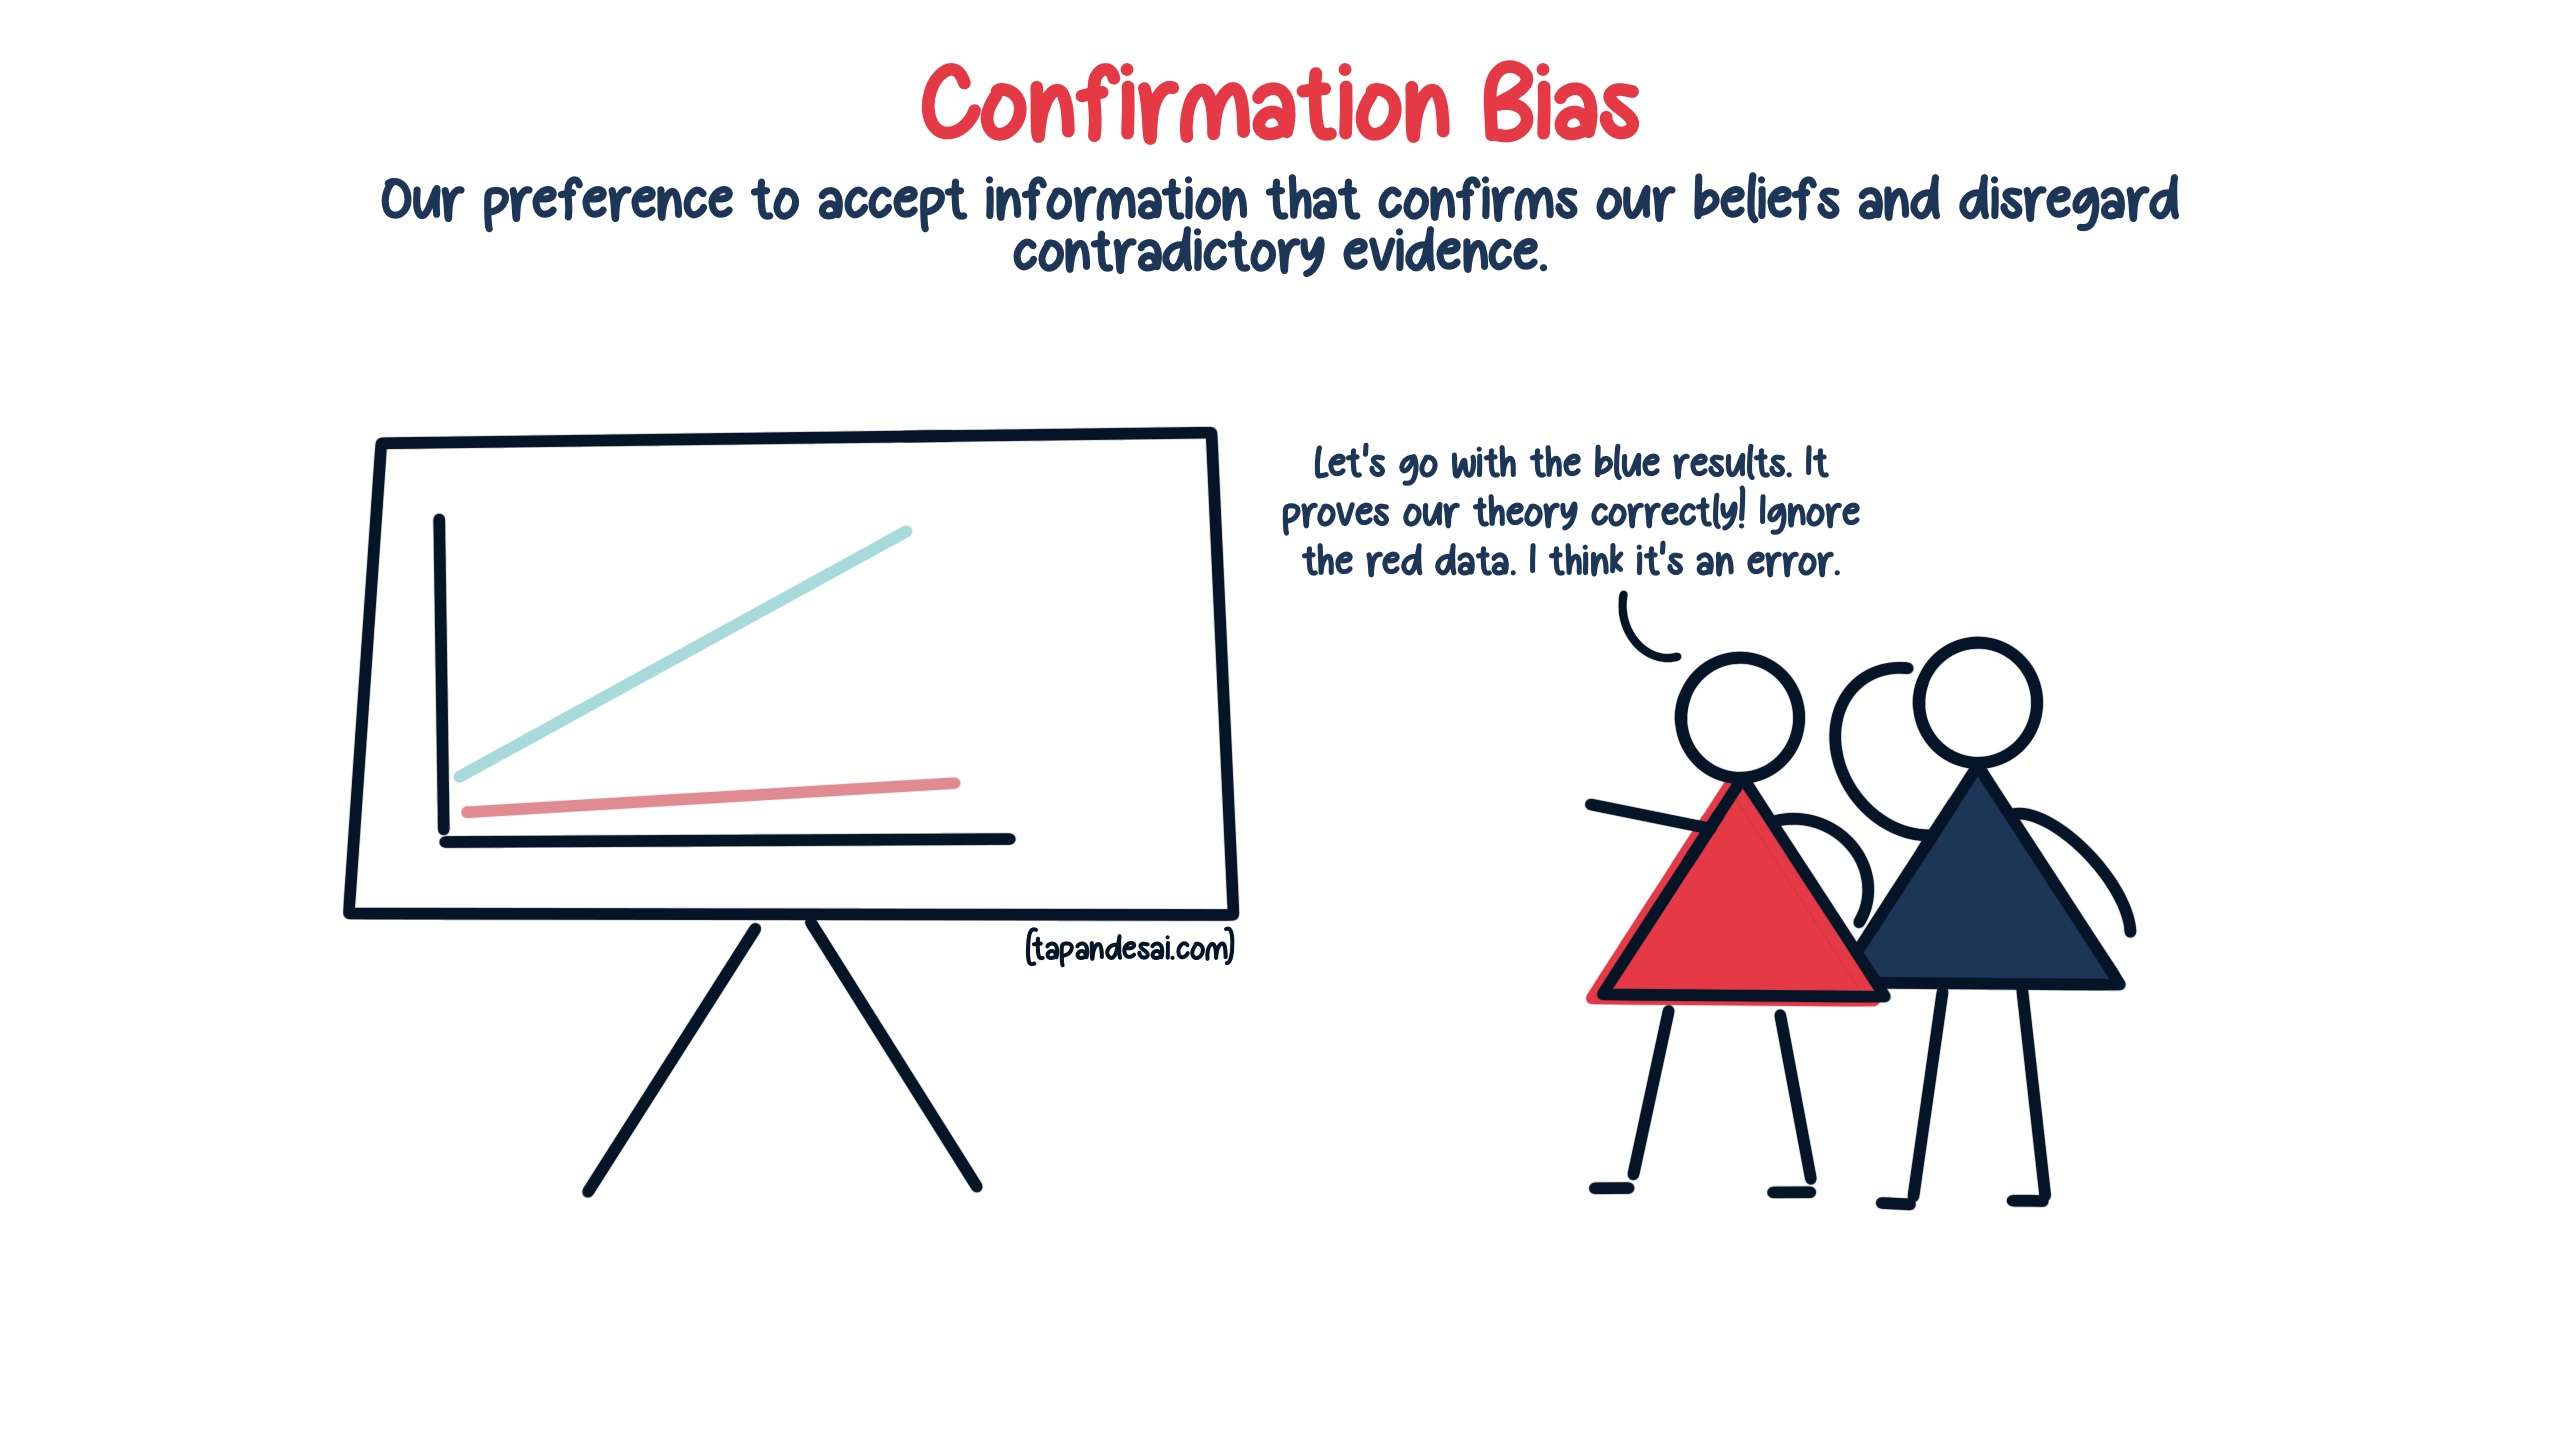 An image showing a person selecting supporting evidence that confirms their theory while contradicting evidence remains in the dark, illustrating Confirmation Bias in statistical interpretation.